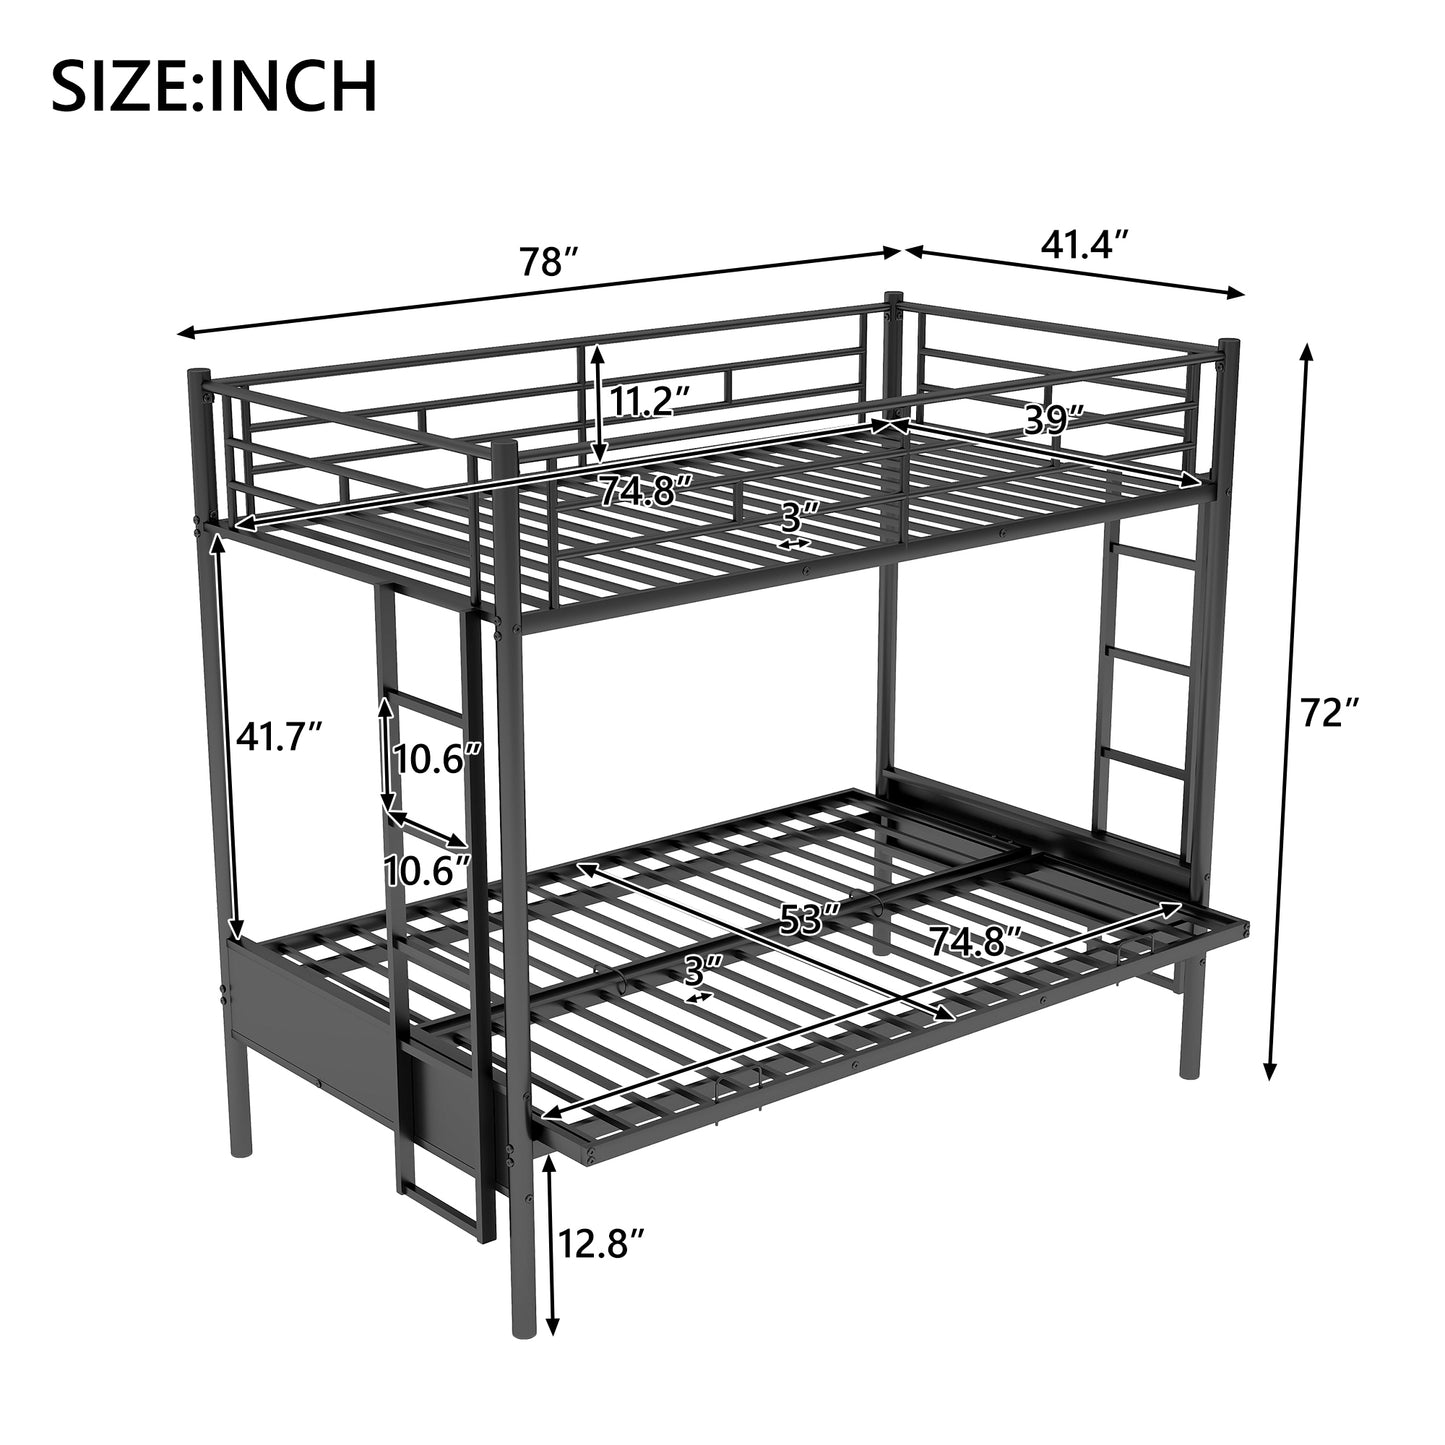 Twin over Full Metal Bunk Bed, Multi-Function,Black